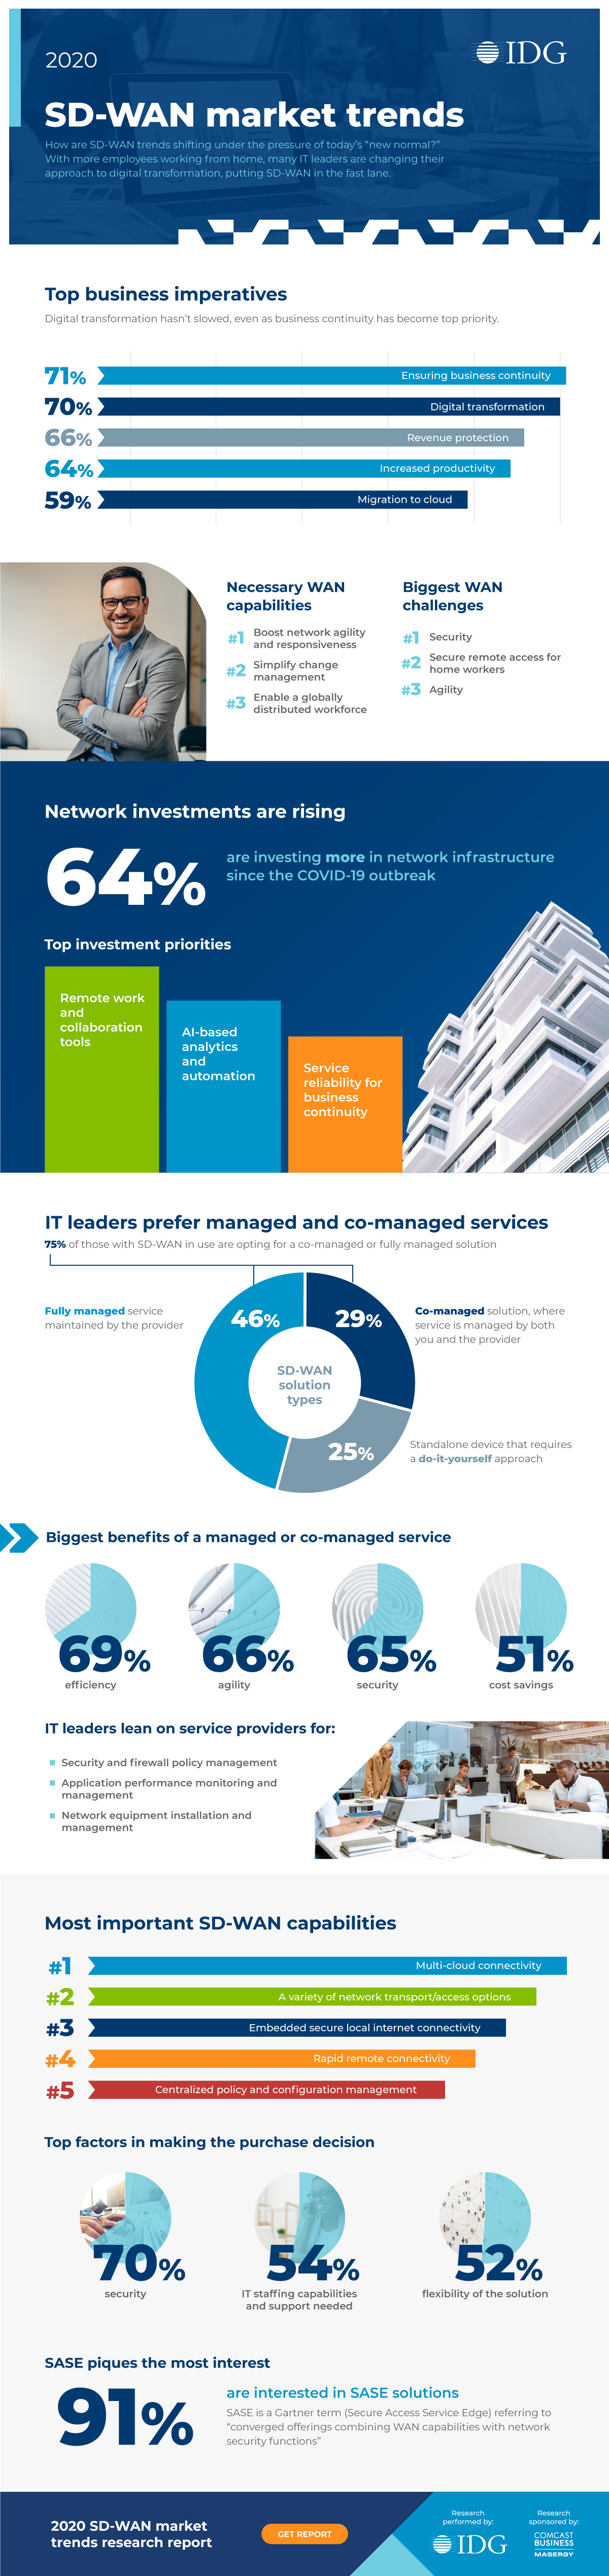 2020 SD-WAN Market Trends Infographic